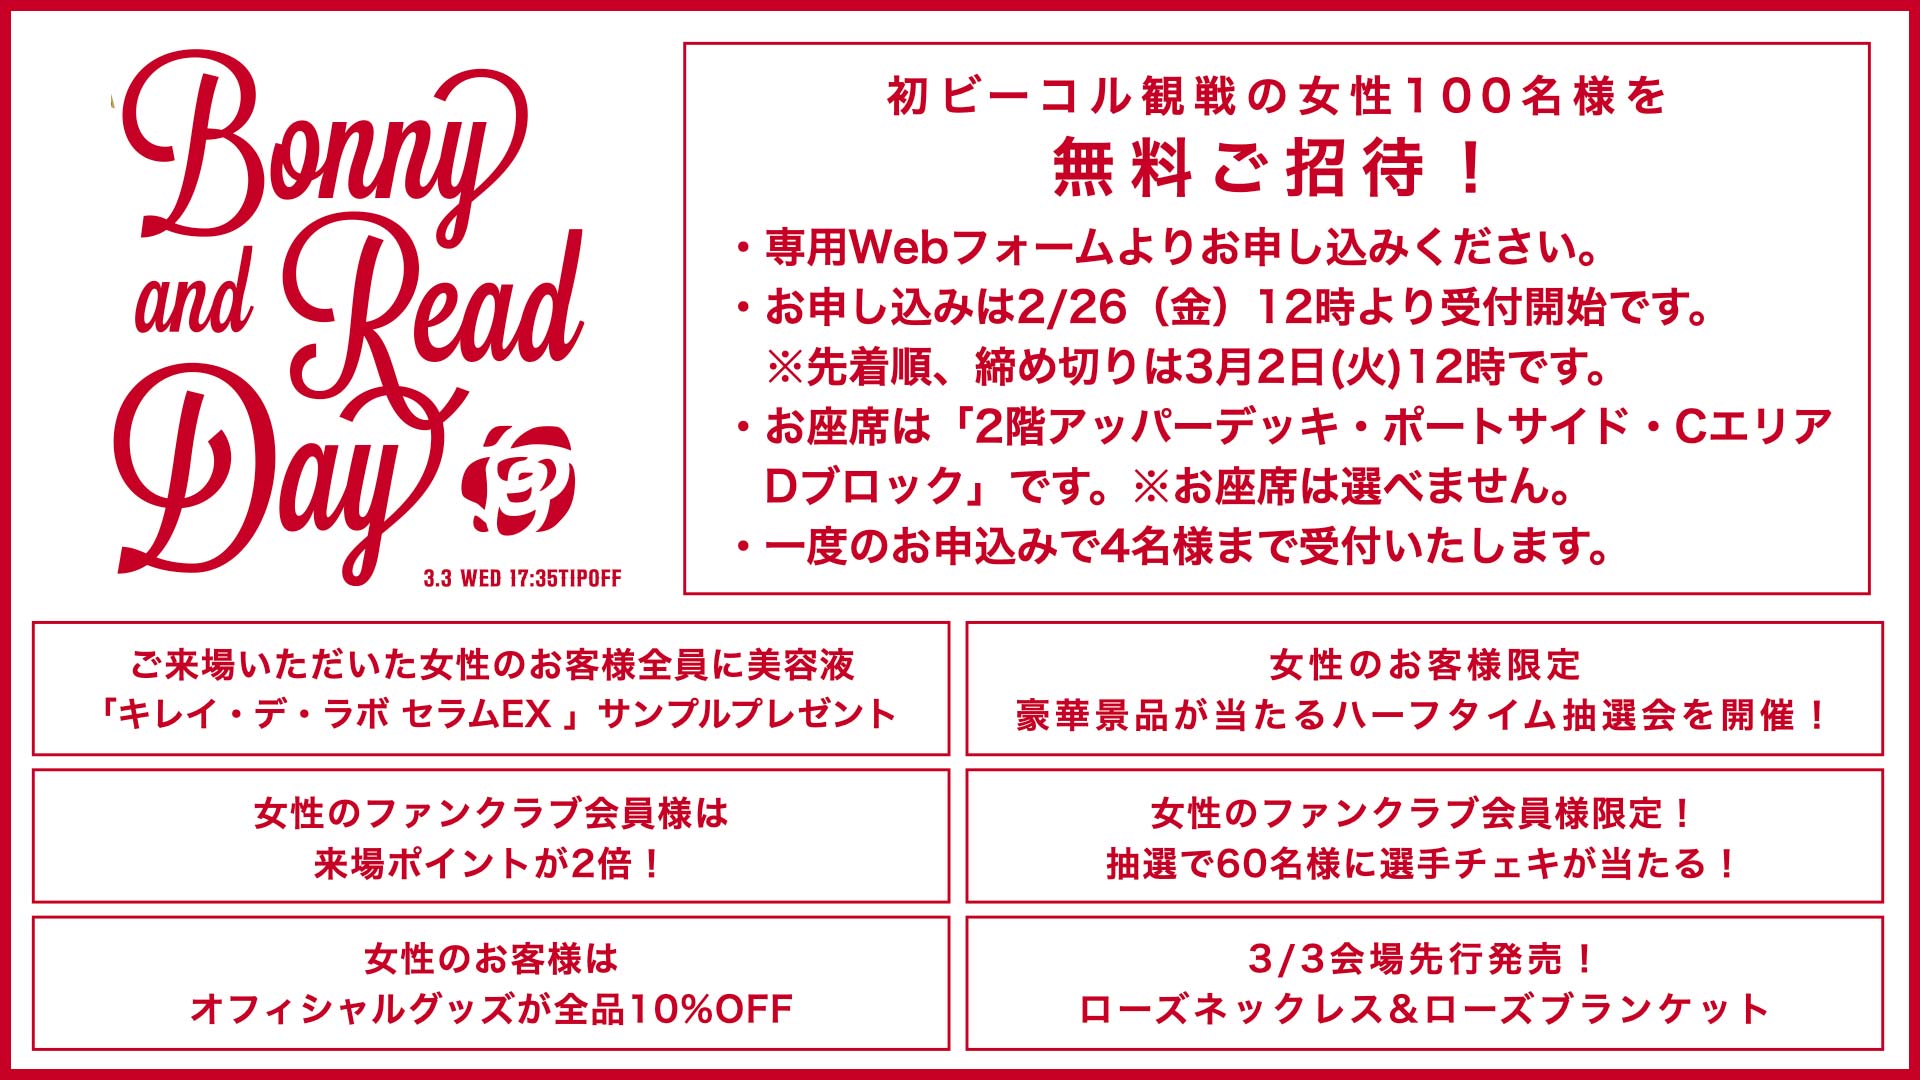 Bonny and Read Day」開催！